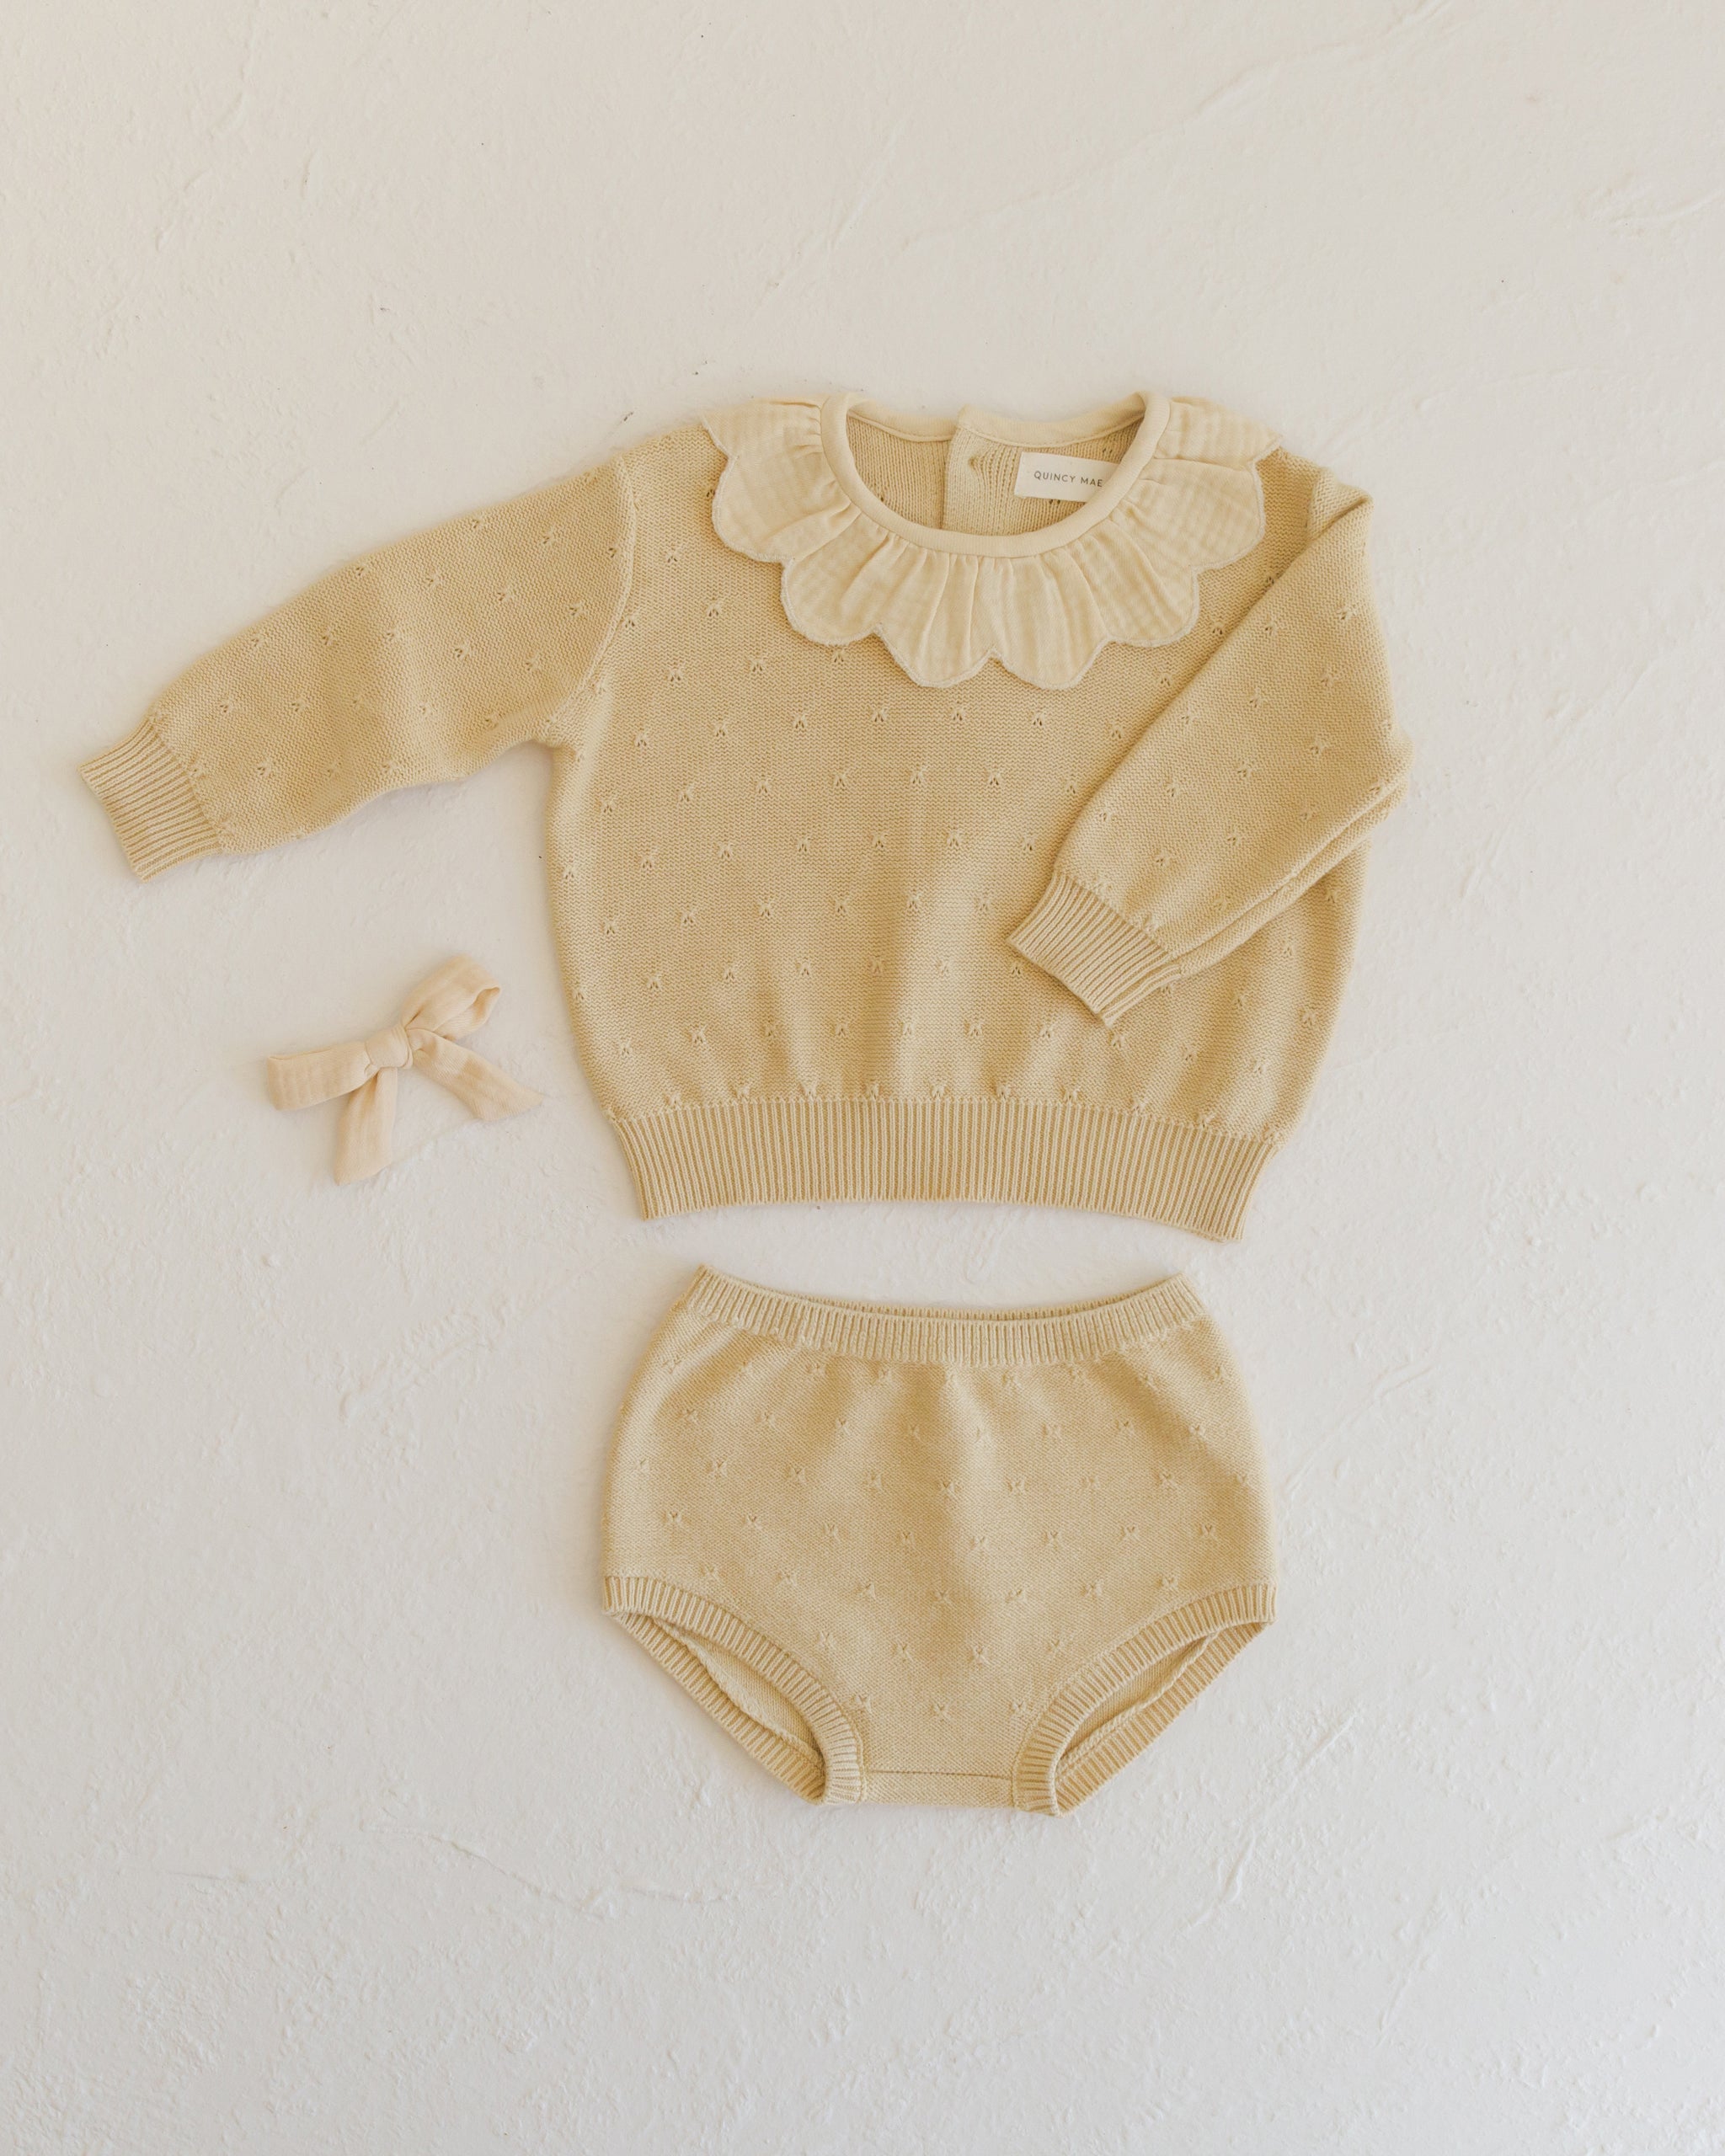 Petal Knit Sweater || Lemon - Rylee + Cru | Kids Clothes | Trendy Baby Clothes | Modern Infant Outfits |